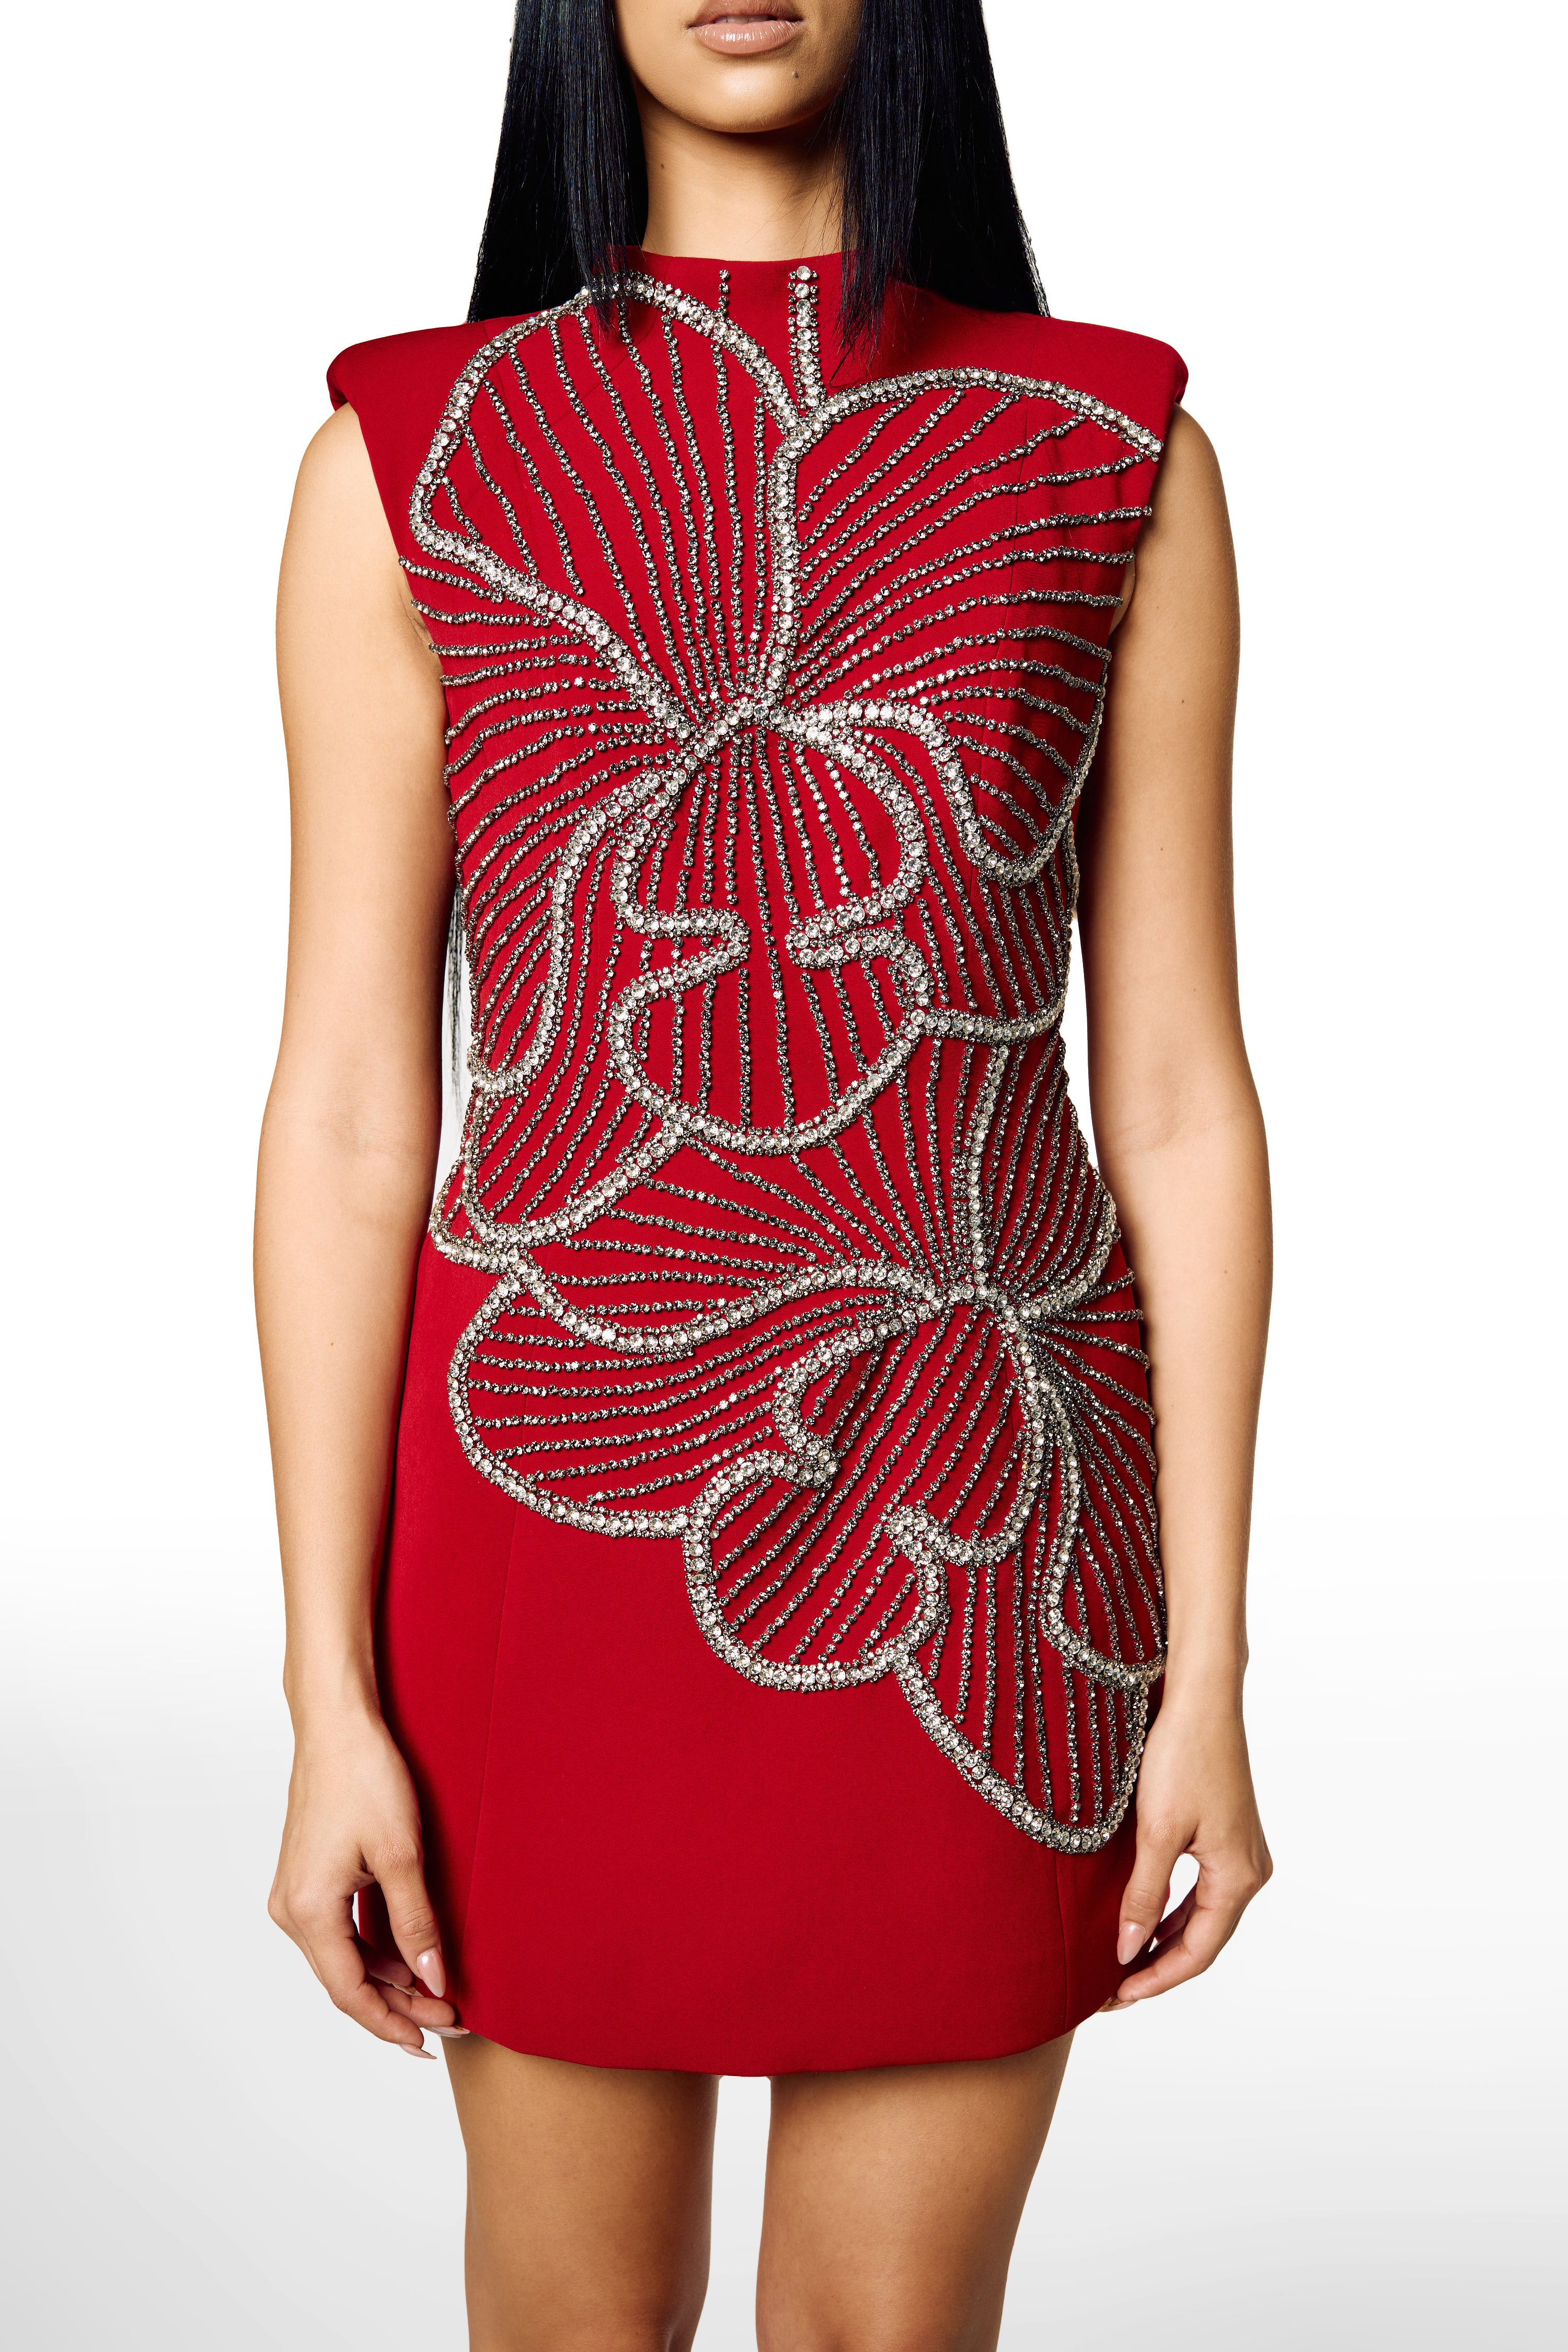 ORCHID PATTERNED BODYCON FULL  RED DRESS